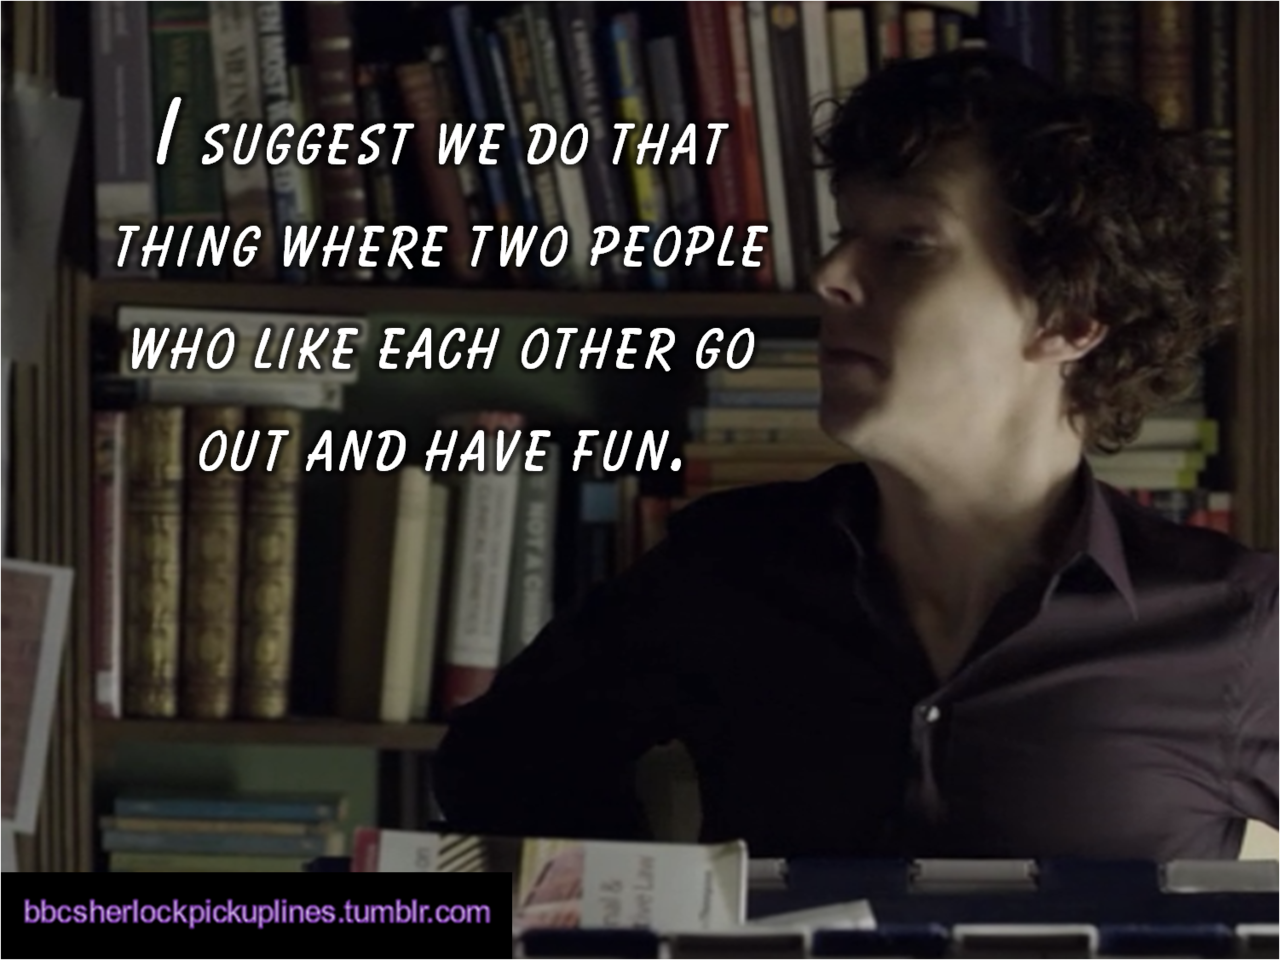 &ldquo;I suggest we do that thing where two people who like each other go out